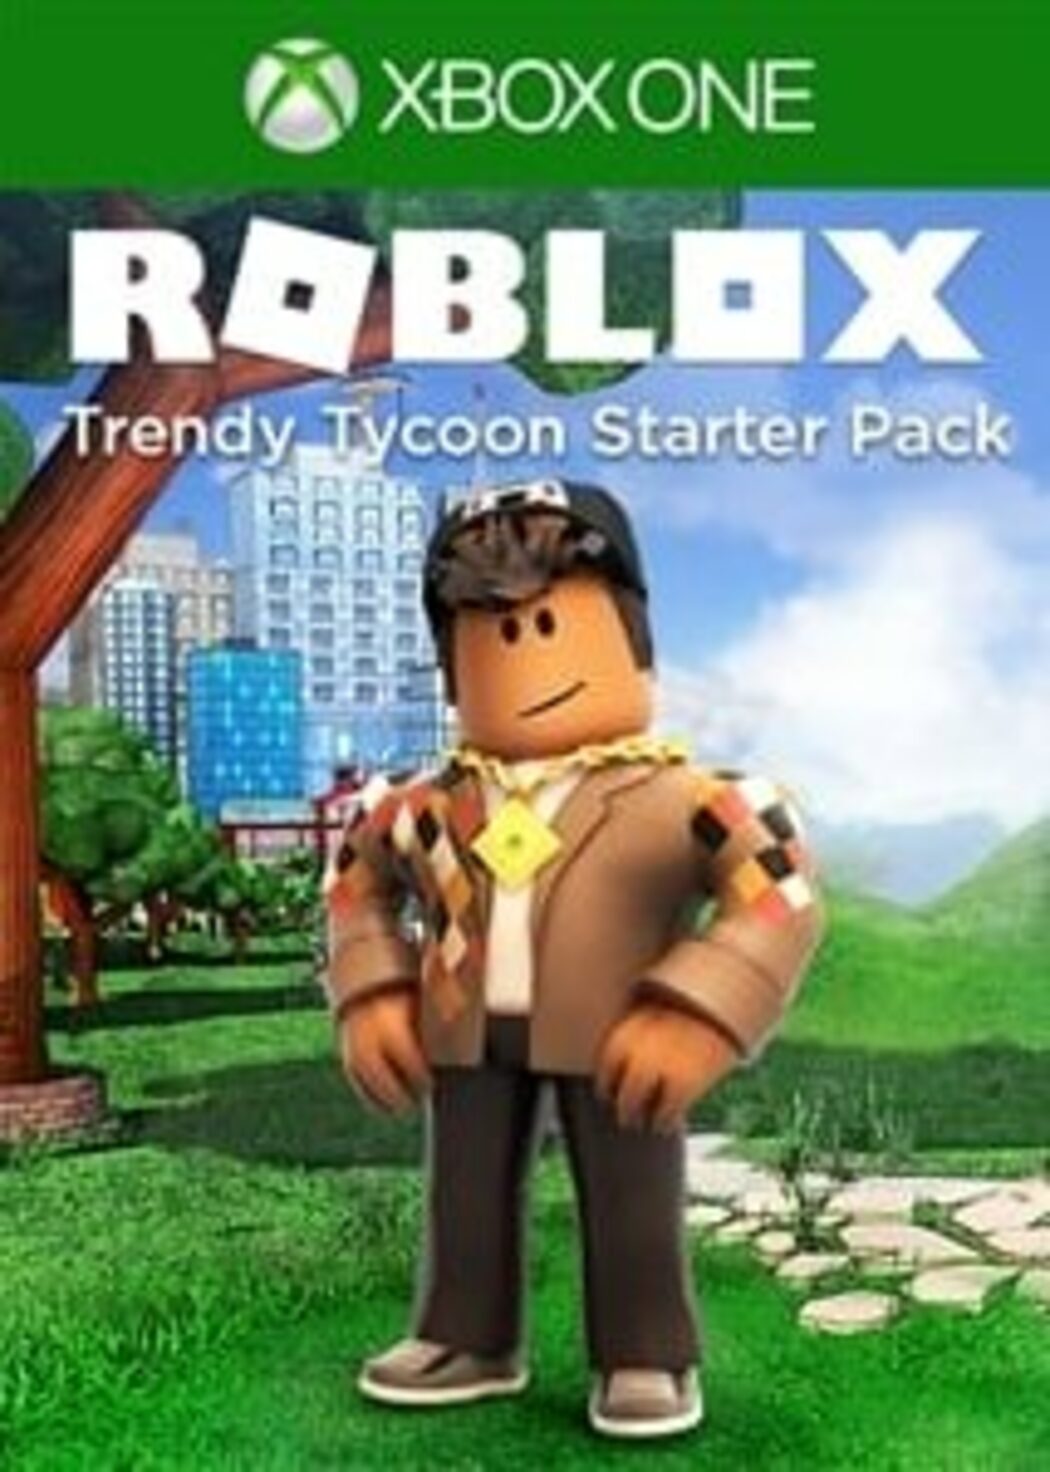 Roblox Black Friday Deals Check Out Cheap Offers Eneba - roblox black friday sale 2020